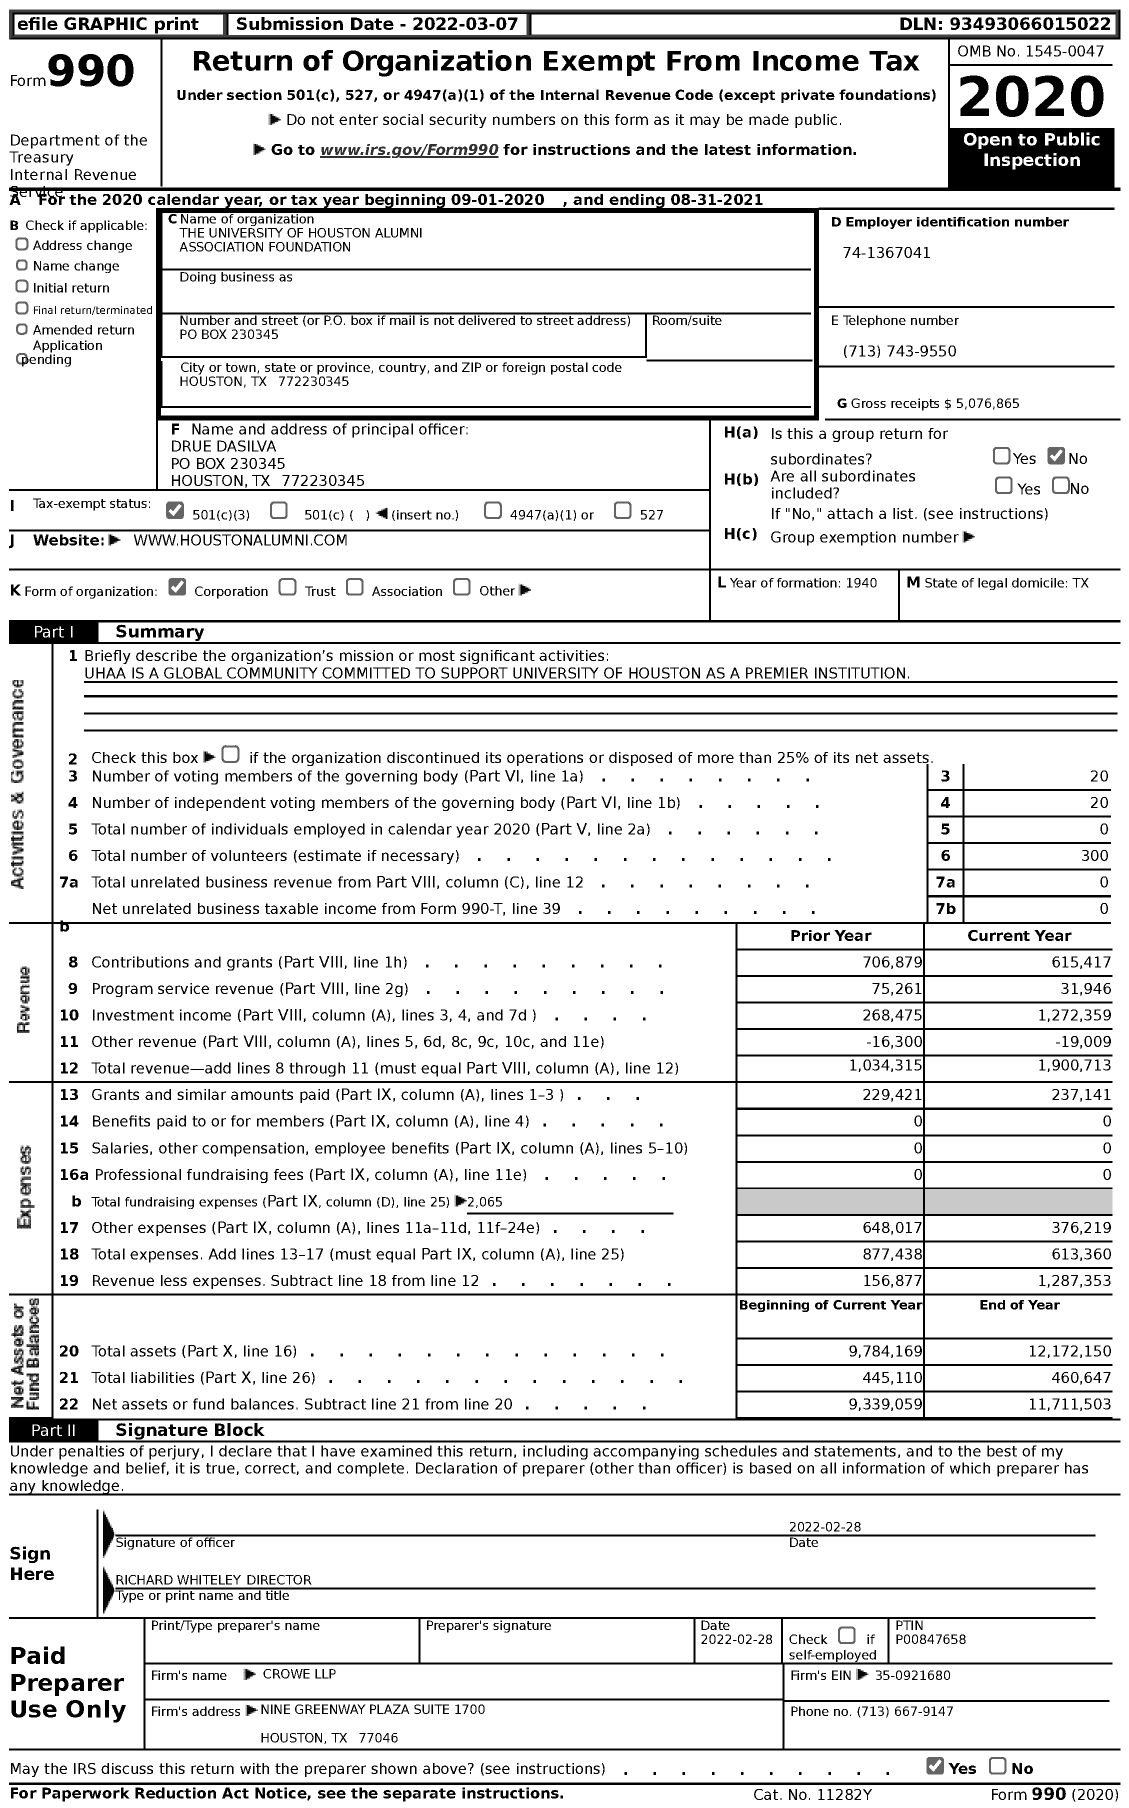 Image of first page of 2020 Form 990 for The University of Houston Alumni Association Foundation